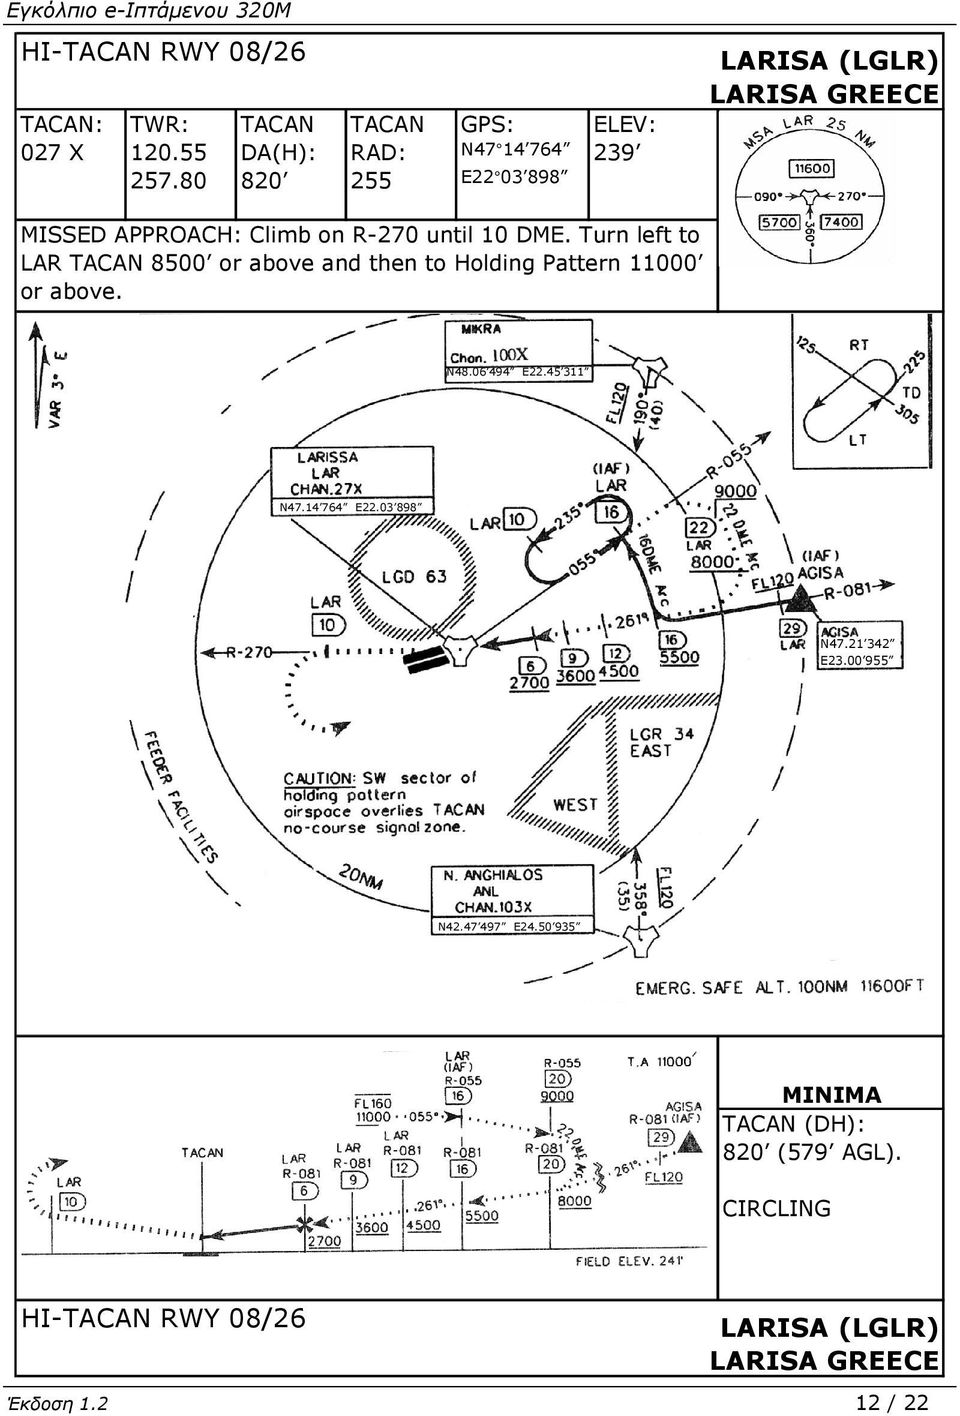 Climb on R-270 until 10 DME. Turn left to LAR TACAN 8500 or above and then to Holding Pattern 11000 or above. N48.